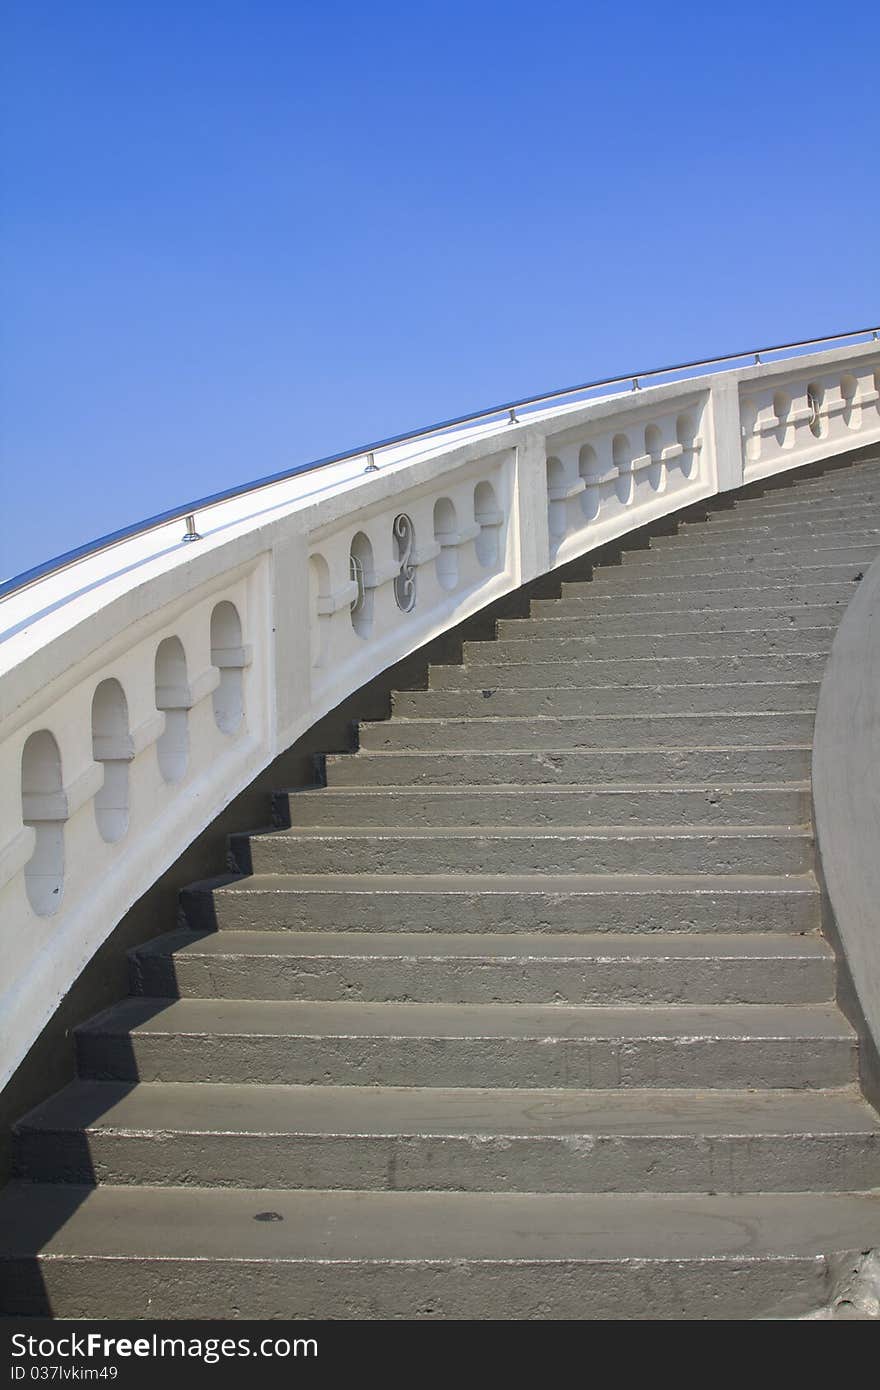 Old white stone circular stairs case in blue sky